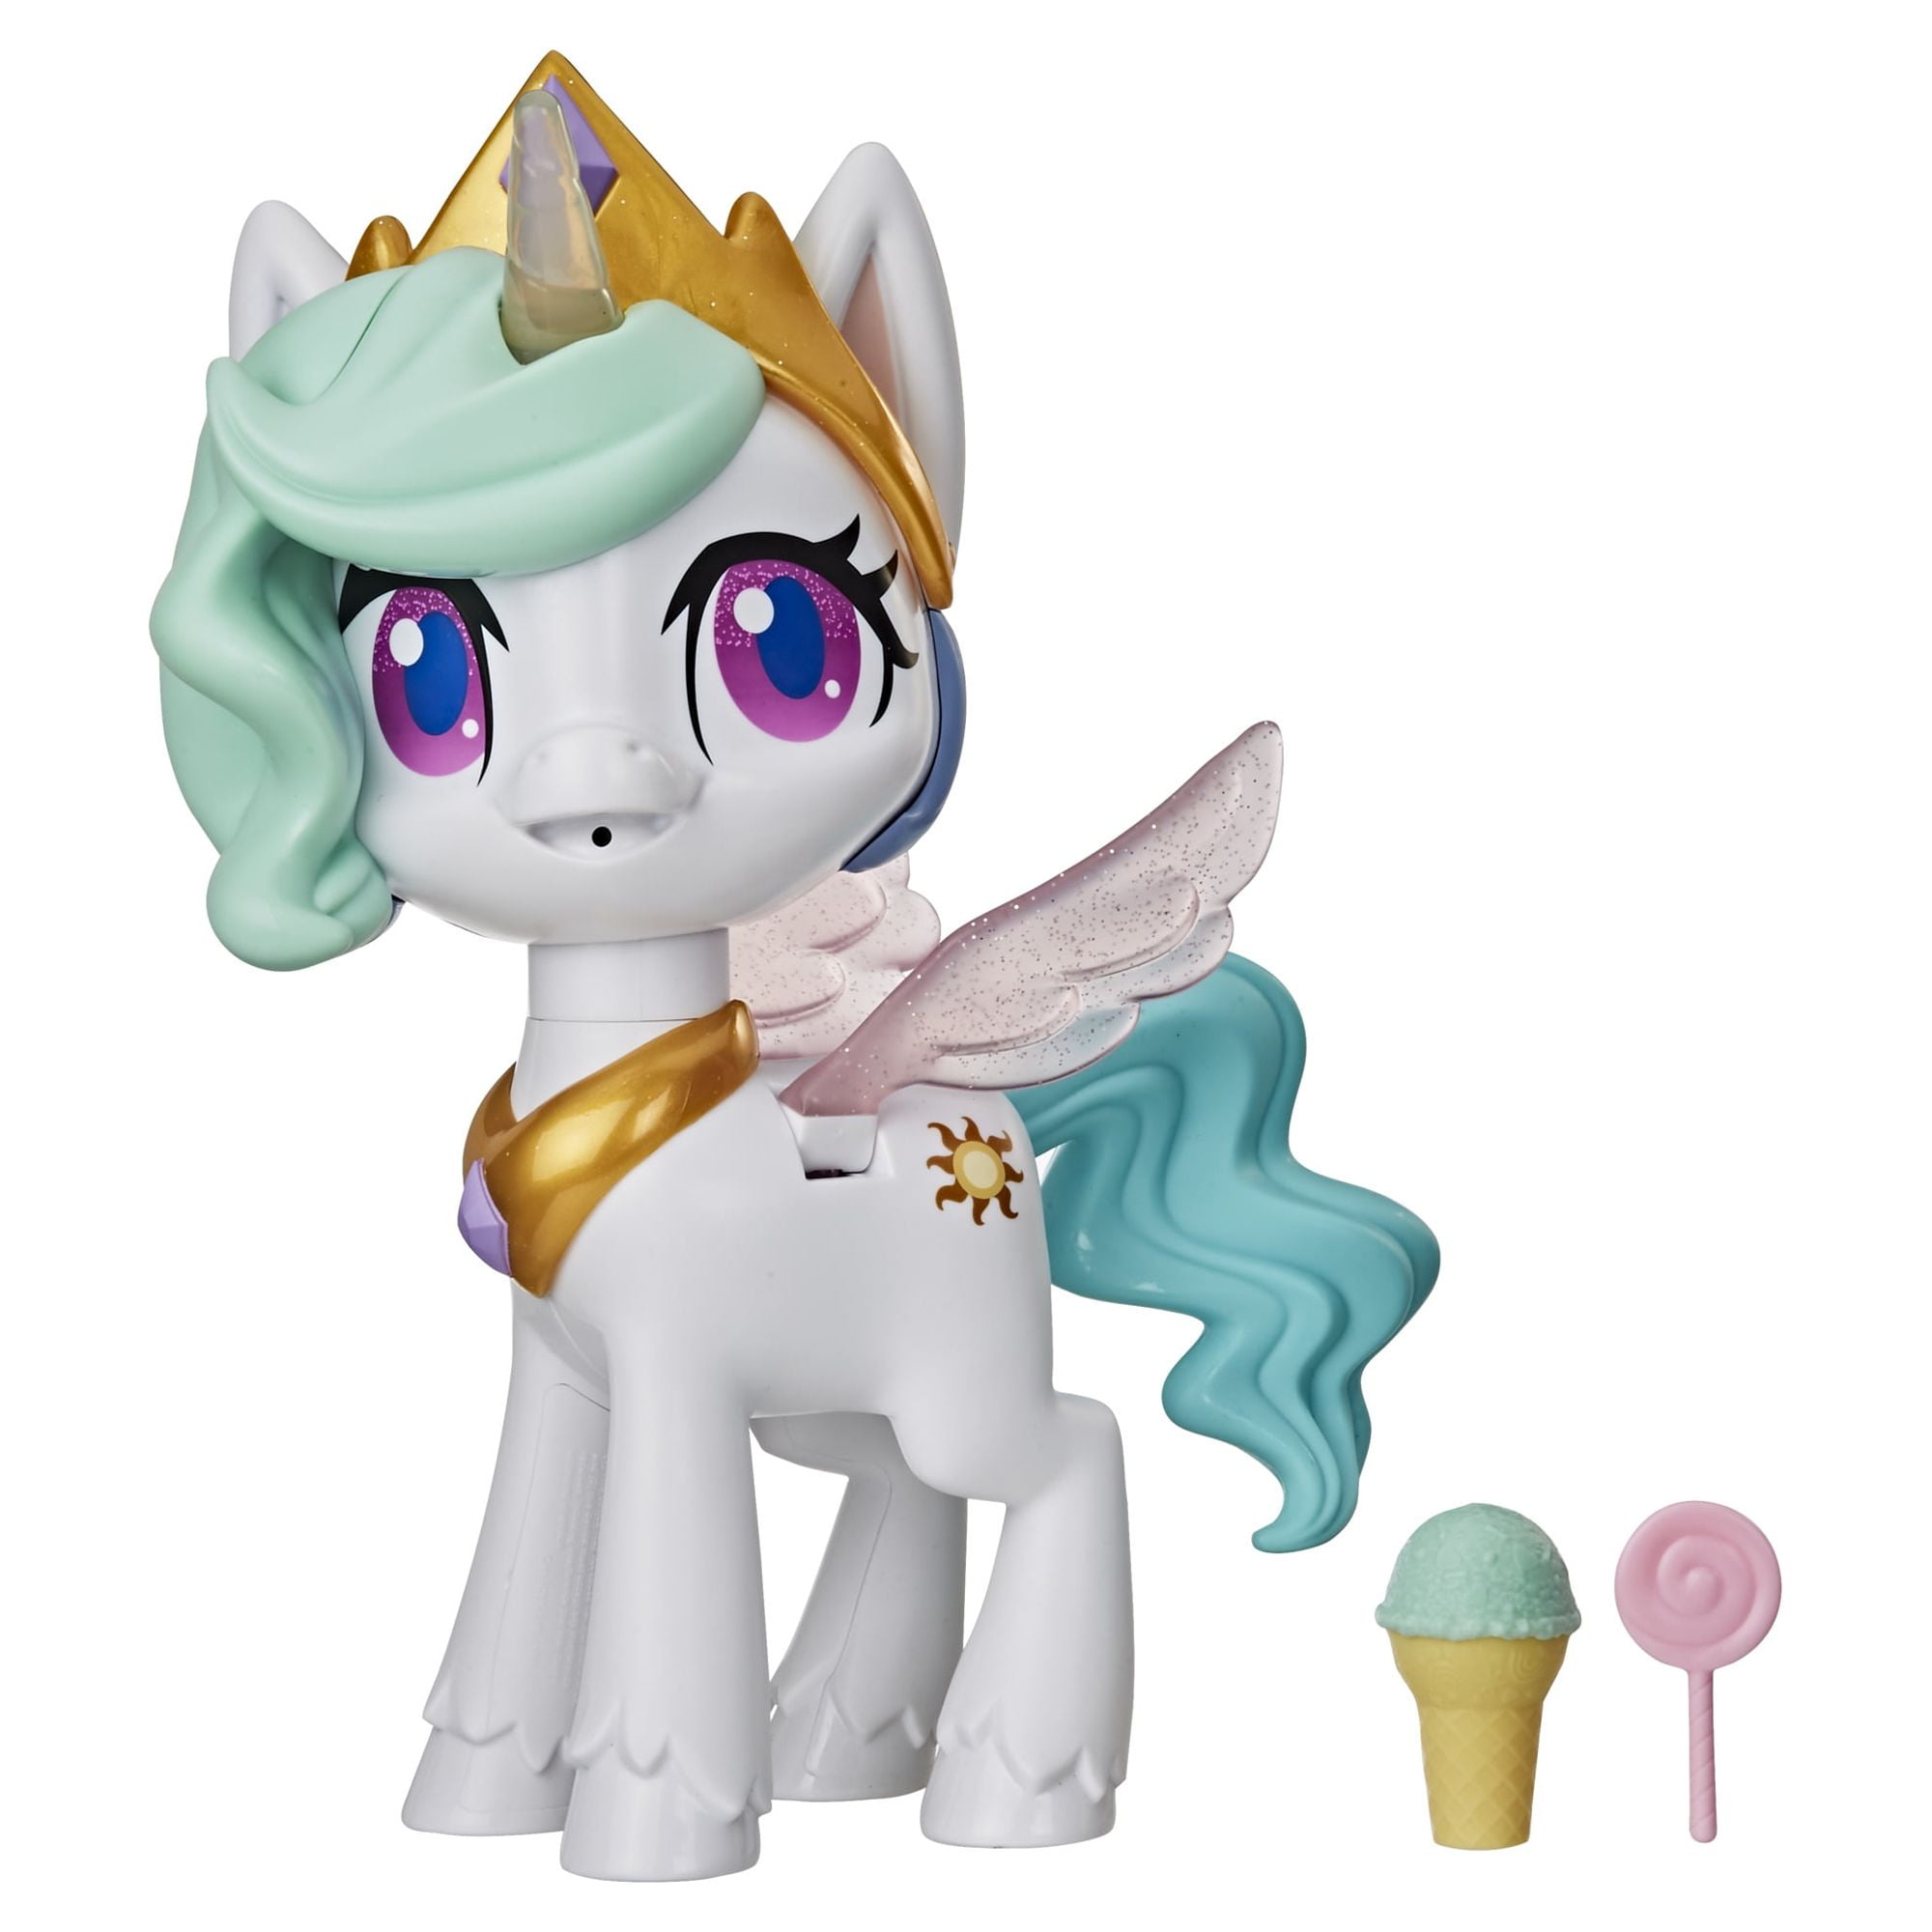 Best of Mlp blow up doll